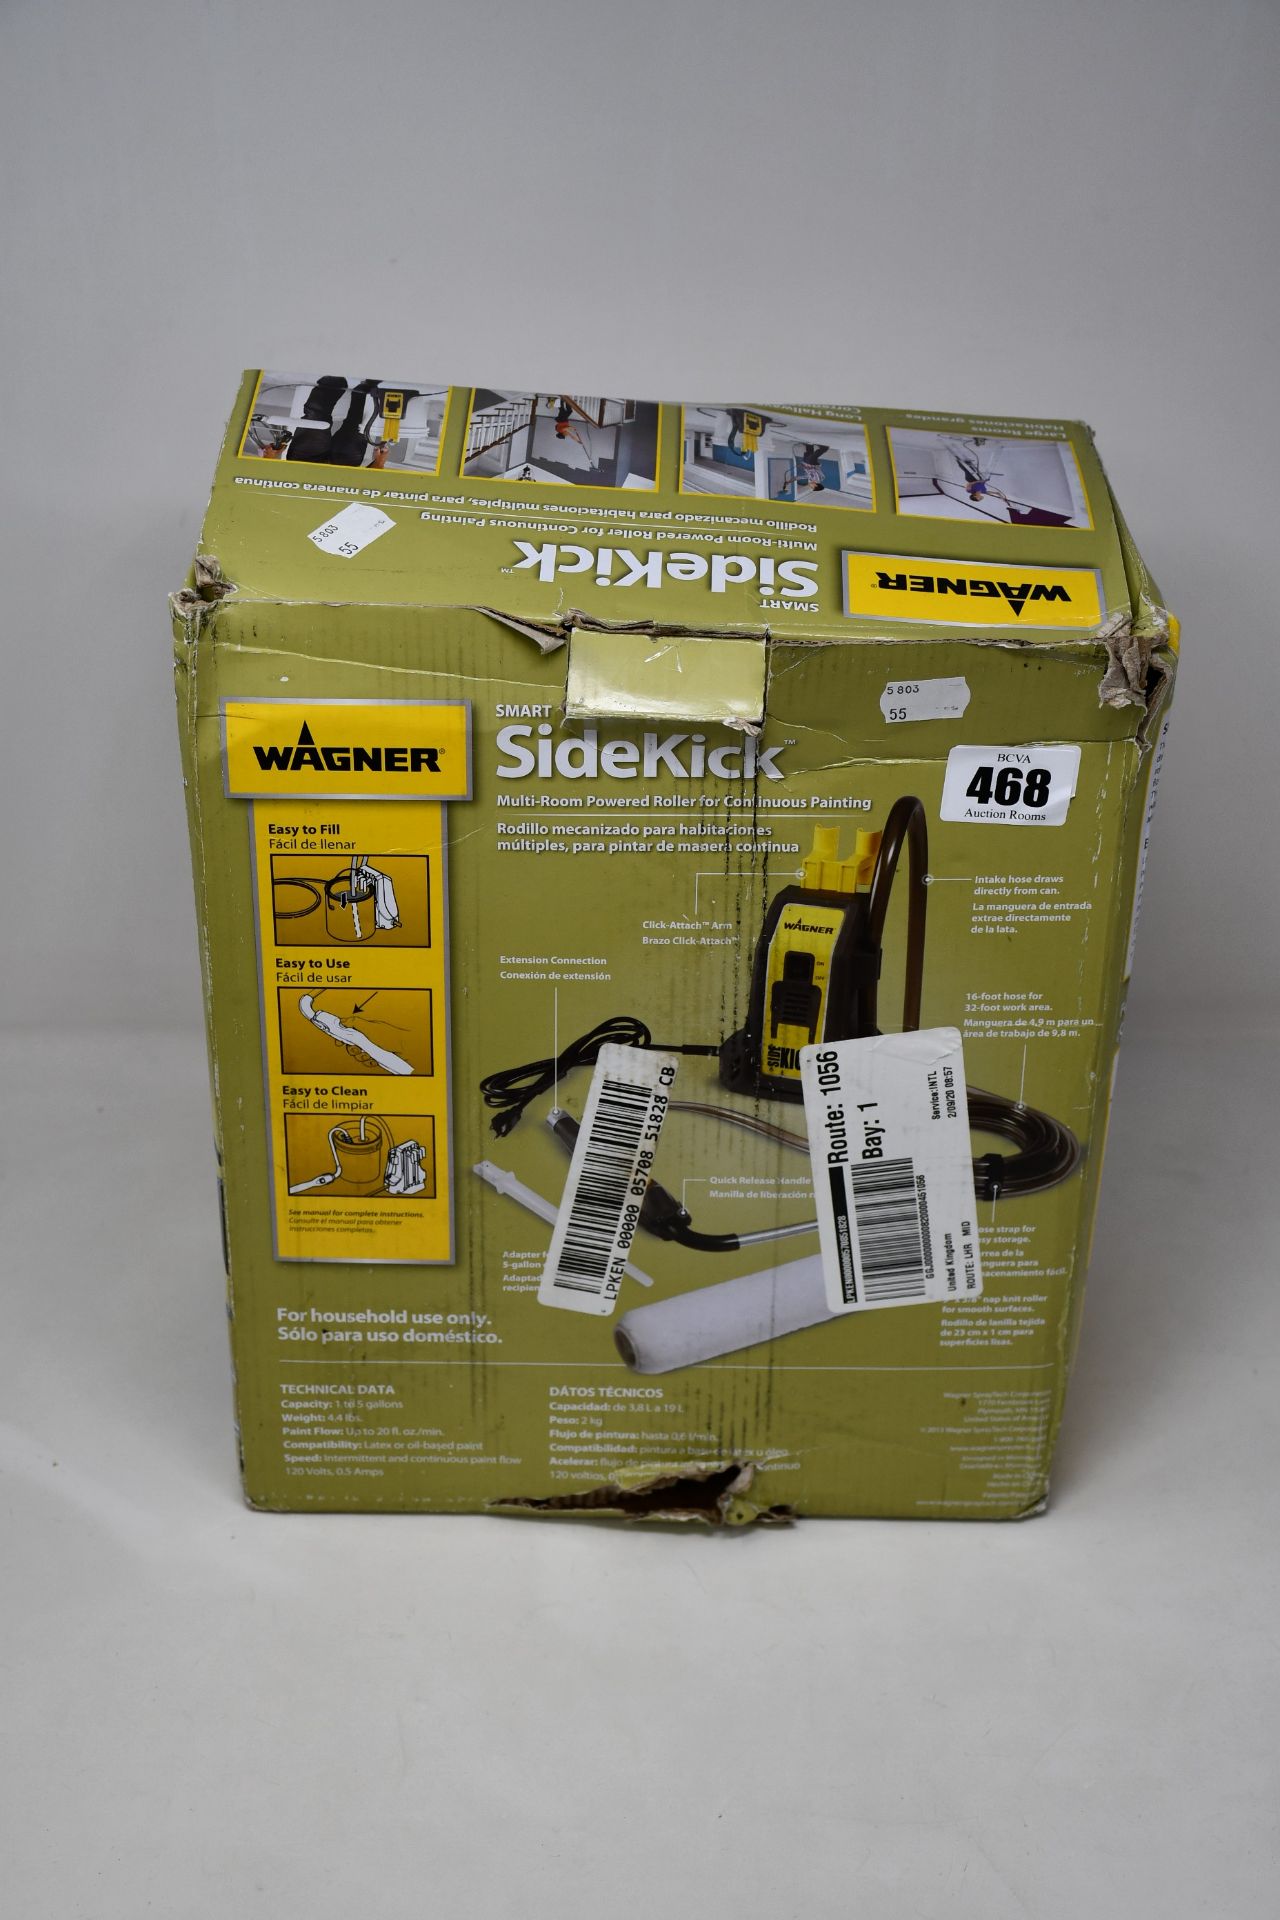 A boxed Wagner Smart Sidekick multi-room powered roller for continuous painting.